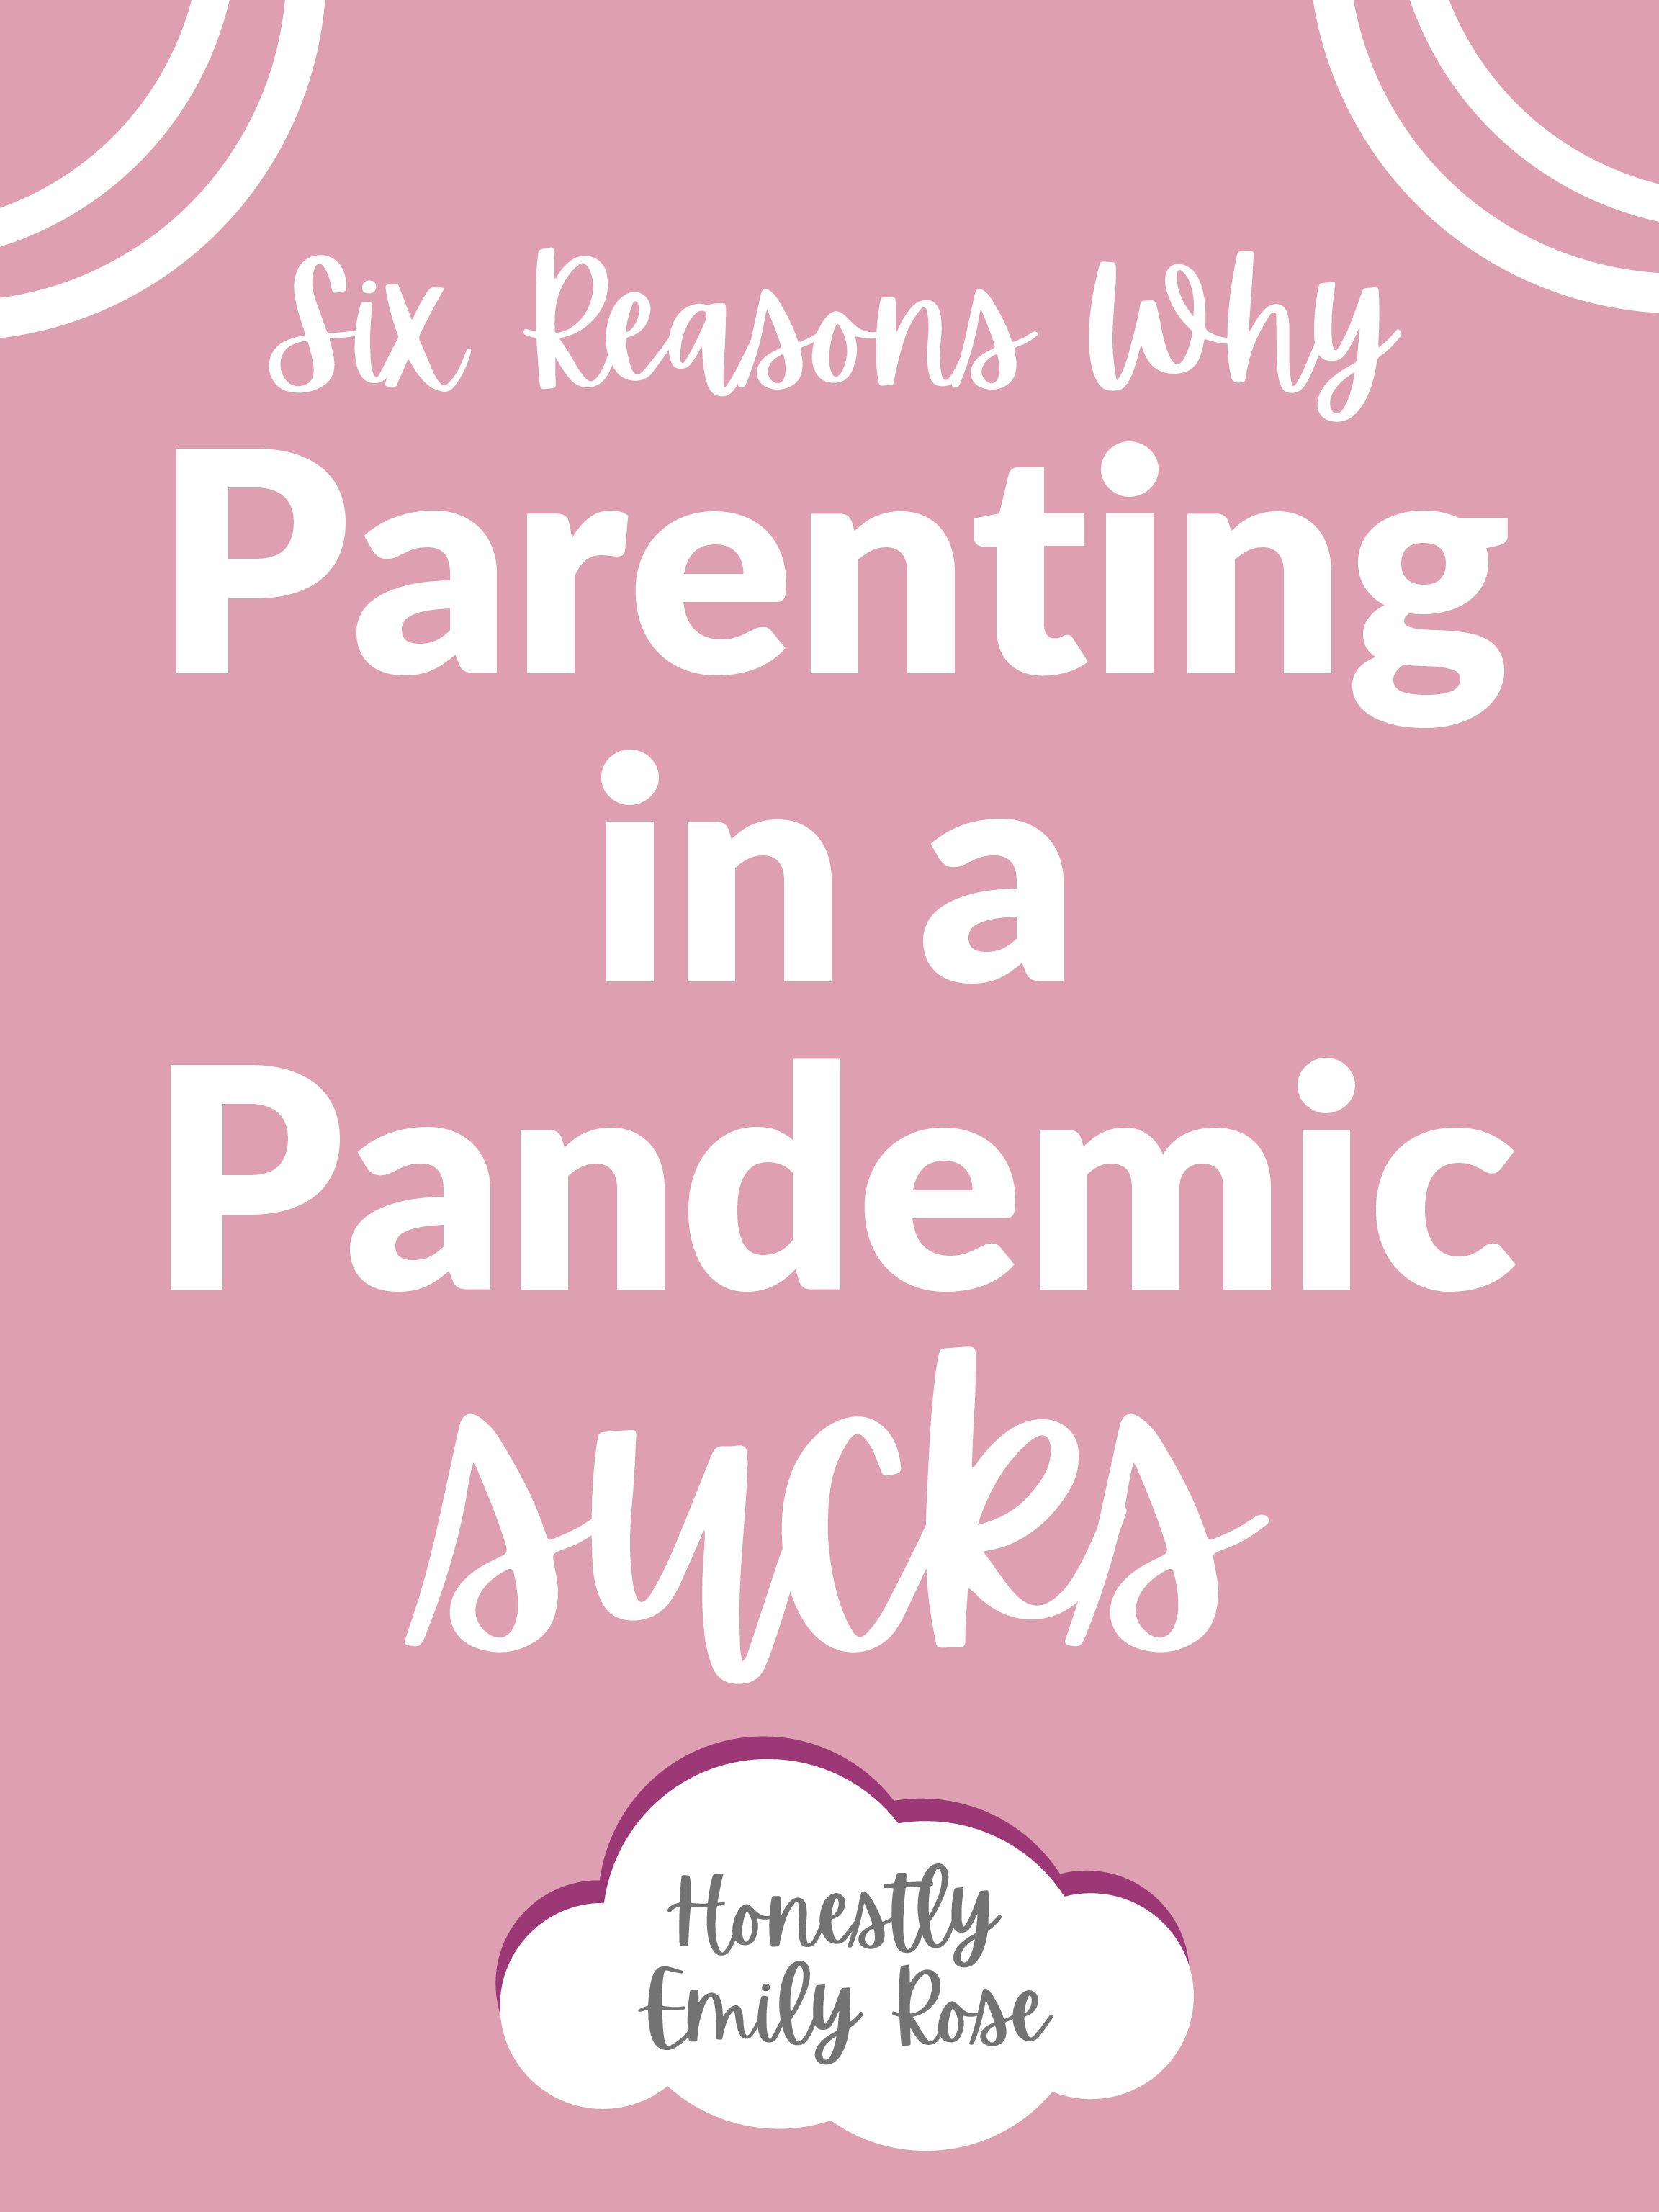 Six Reasons Why Parenting in a Pandemic Sucks